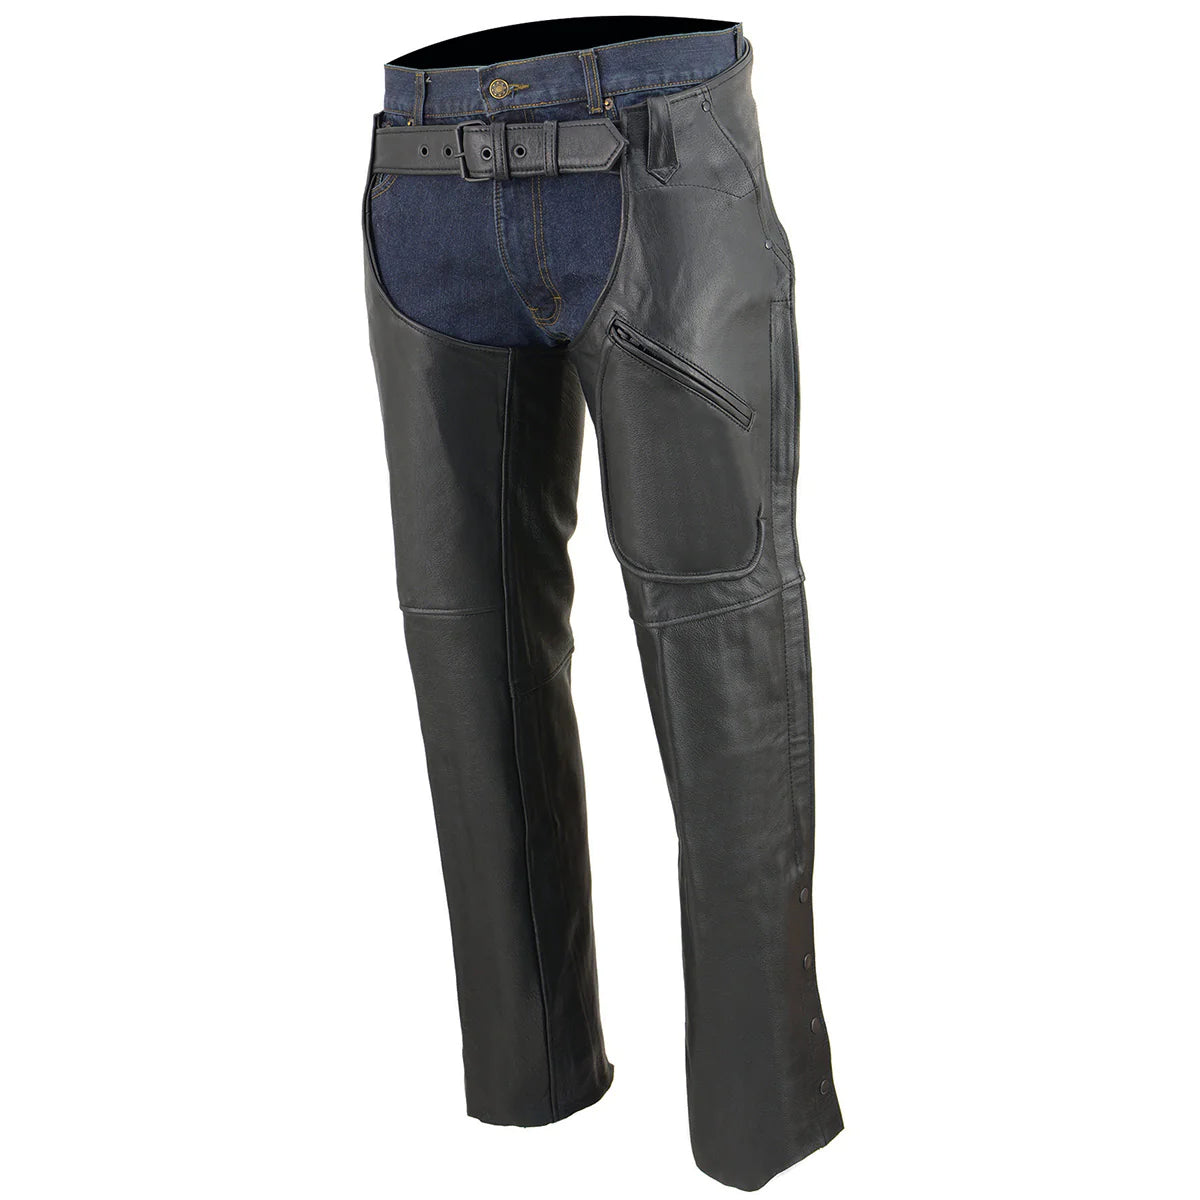 Men's Black Premium Leather 3 Pocket Chaps with Thigh Patch Pocket